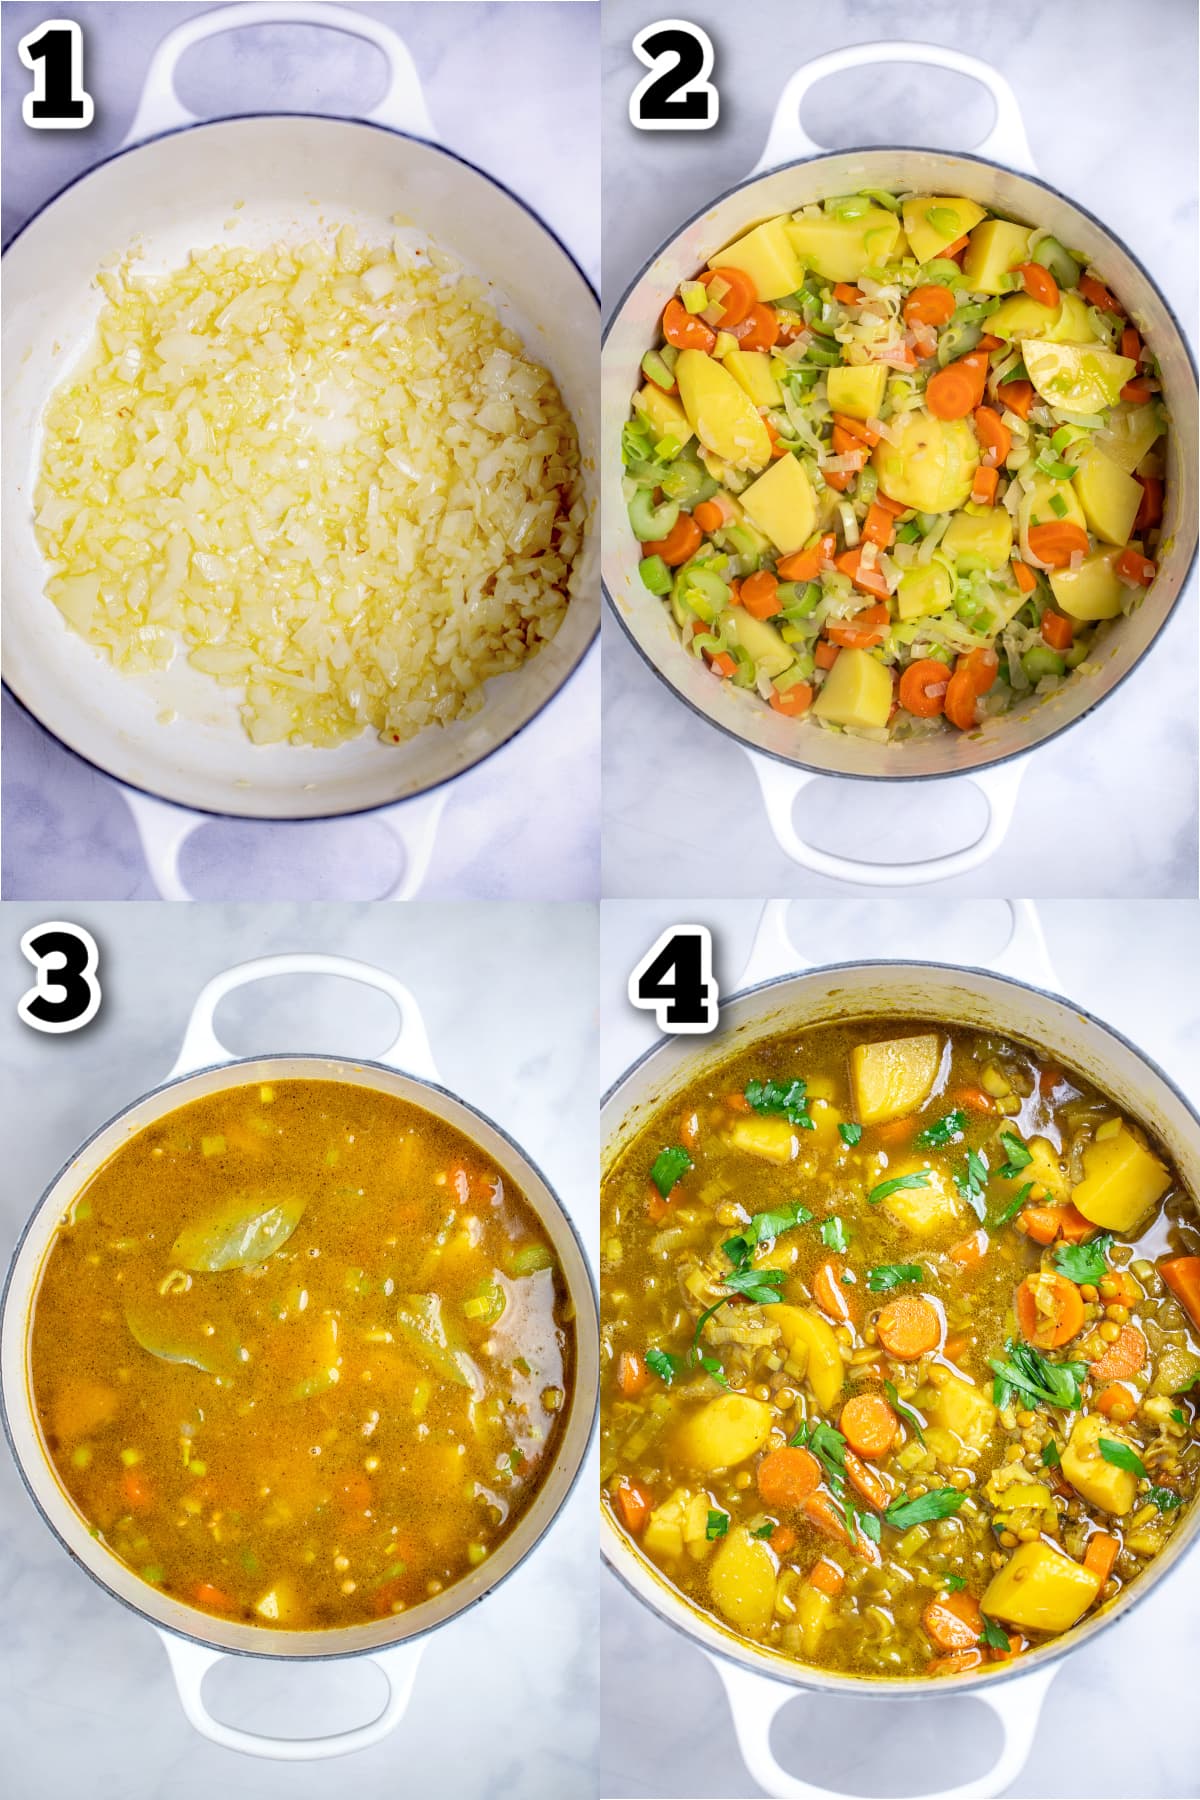 Step by step photos for how to make lentil vegetable soup.